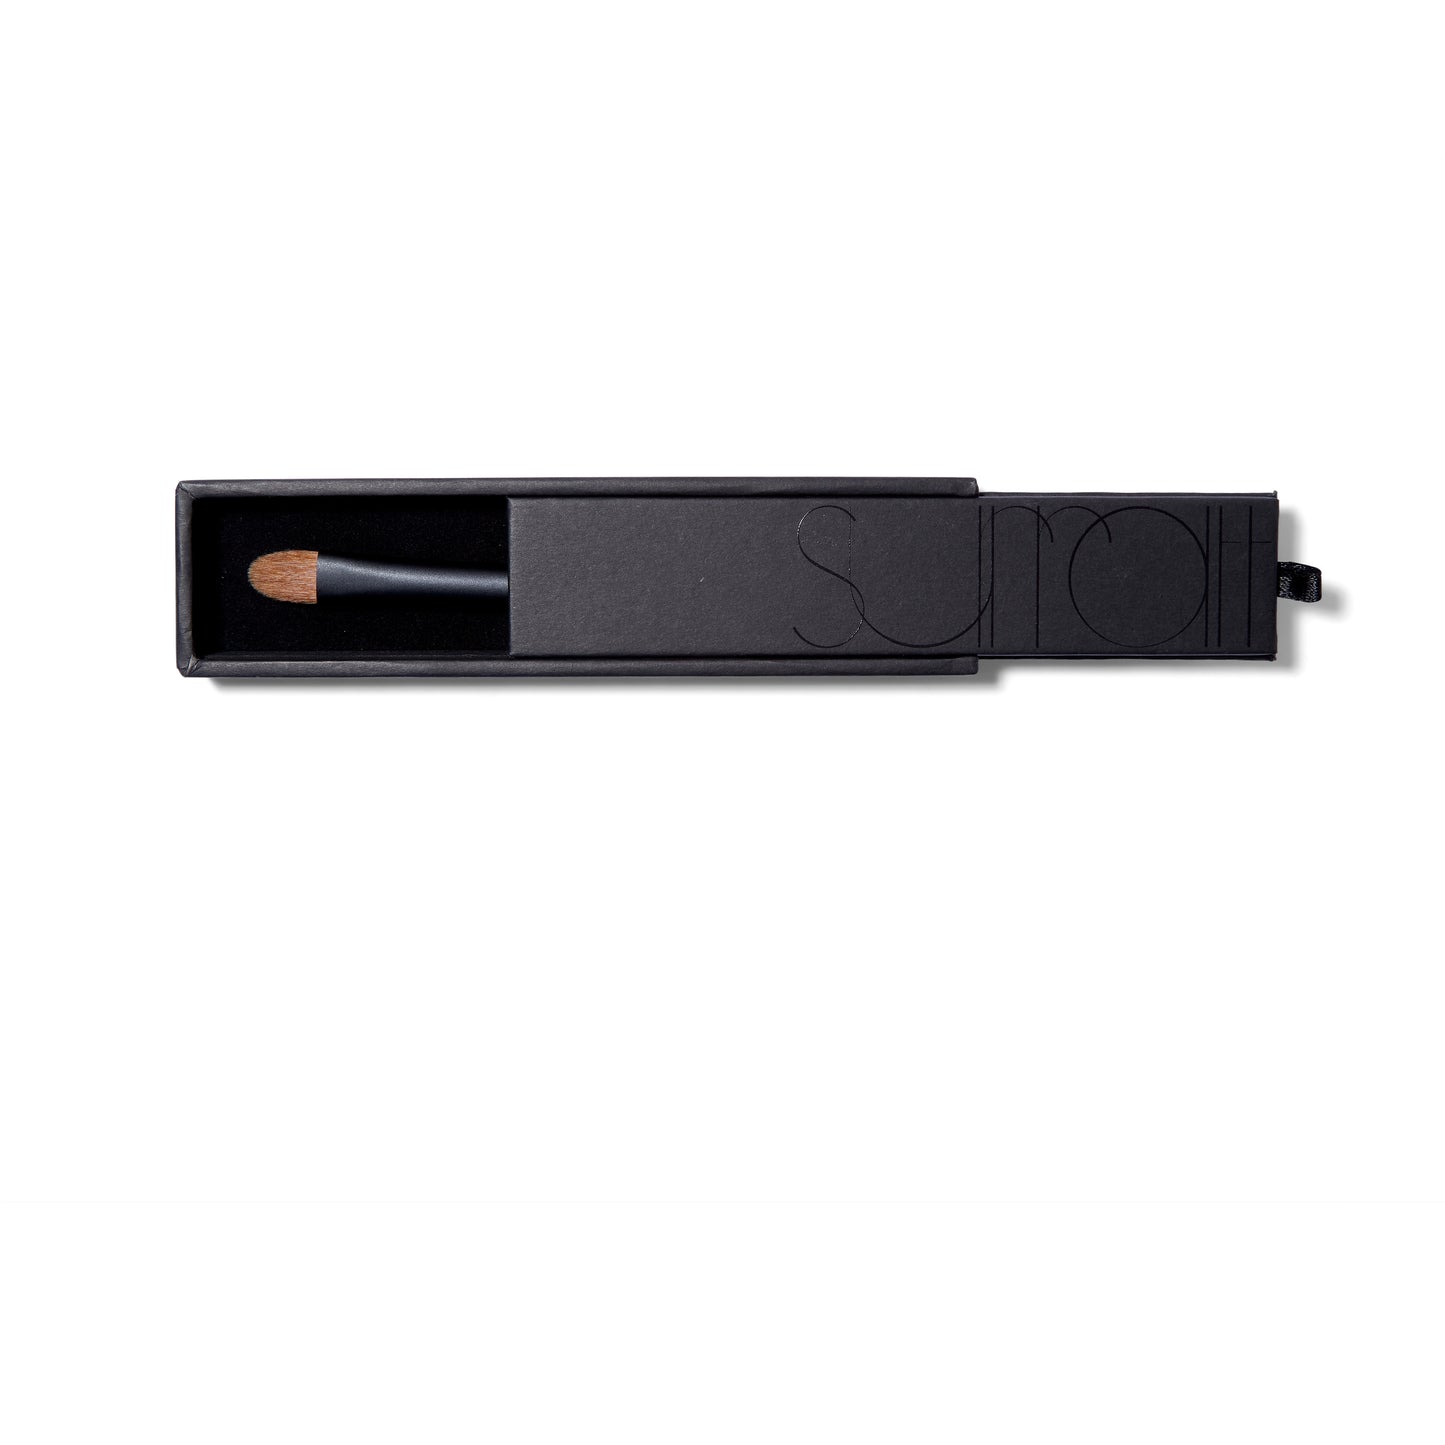 The Surratt Perfectionniste Complexion brush. in a black sturdy box. The handle is black with subtle purple shimmer. The natural bristles are brown and in a soft curved taper. 